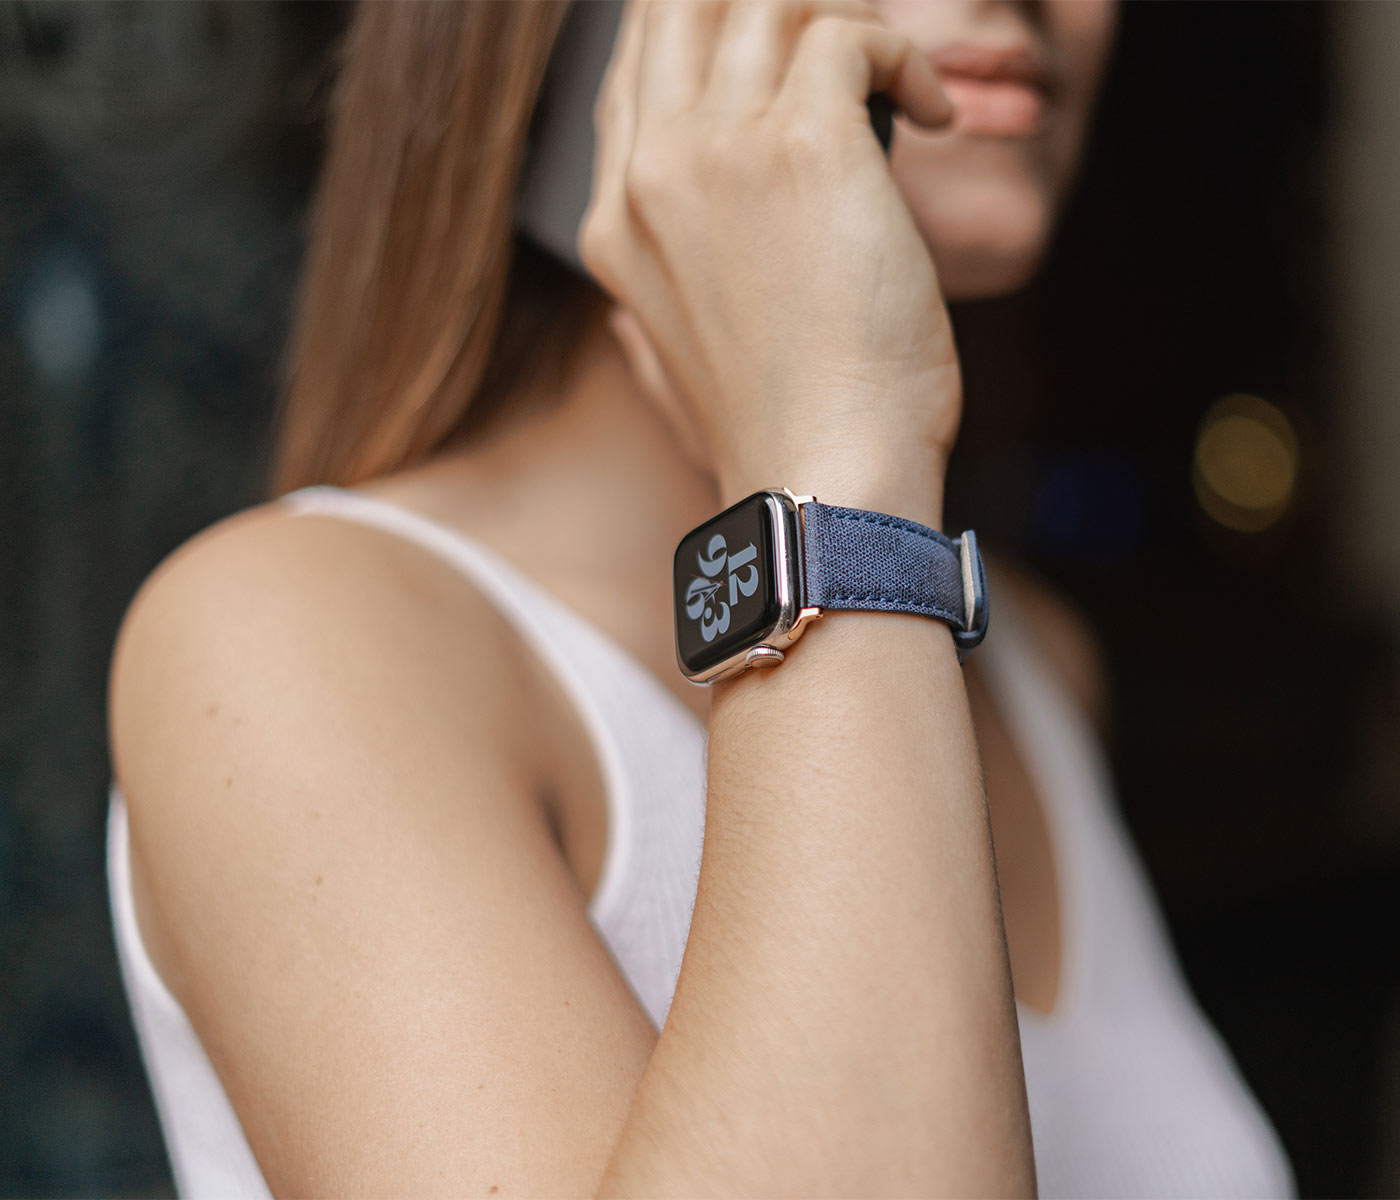 https://www.meridioband.com/wp-content/uploads/2021/06/Recycled-Blue-cotton-apple-watch-band-for-her-summer-mood.jpg